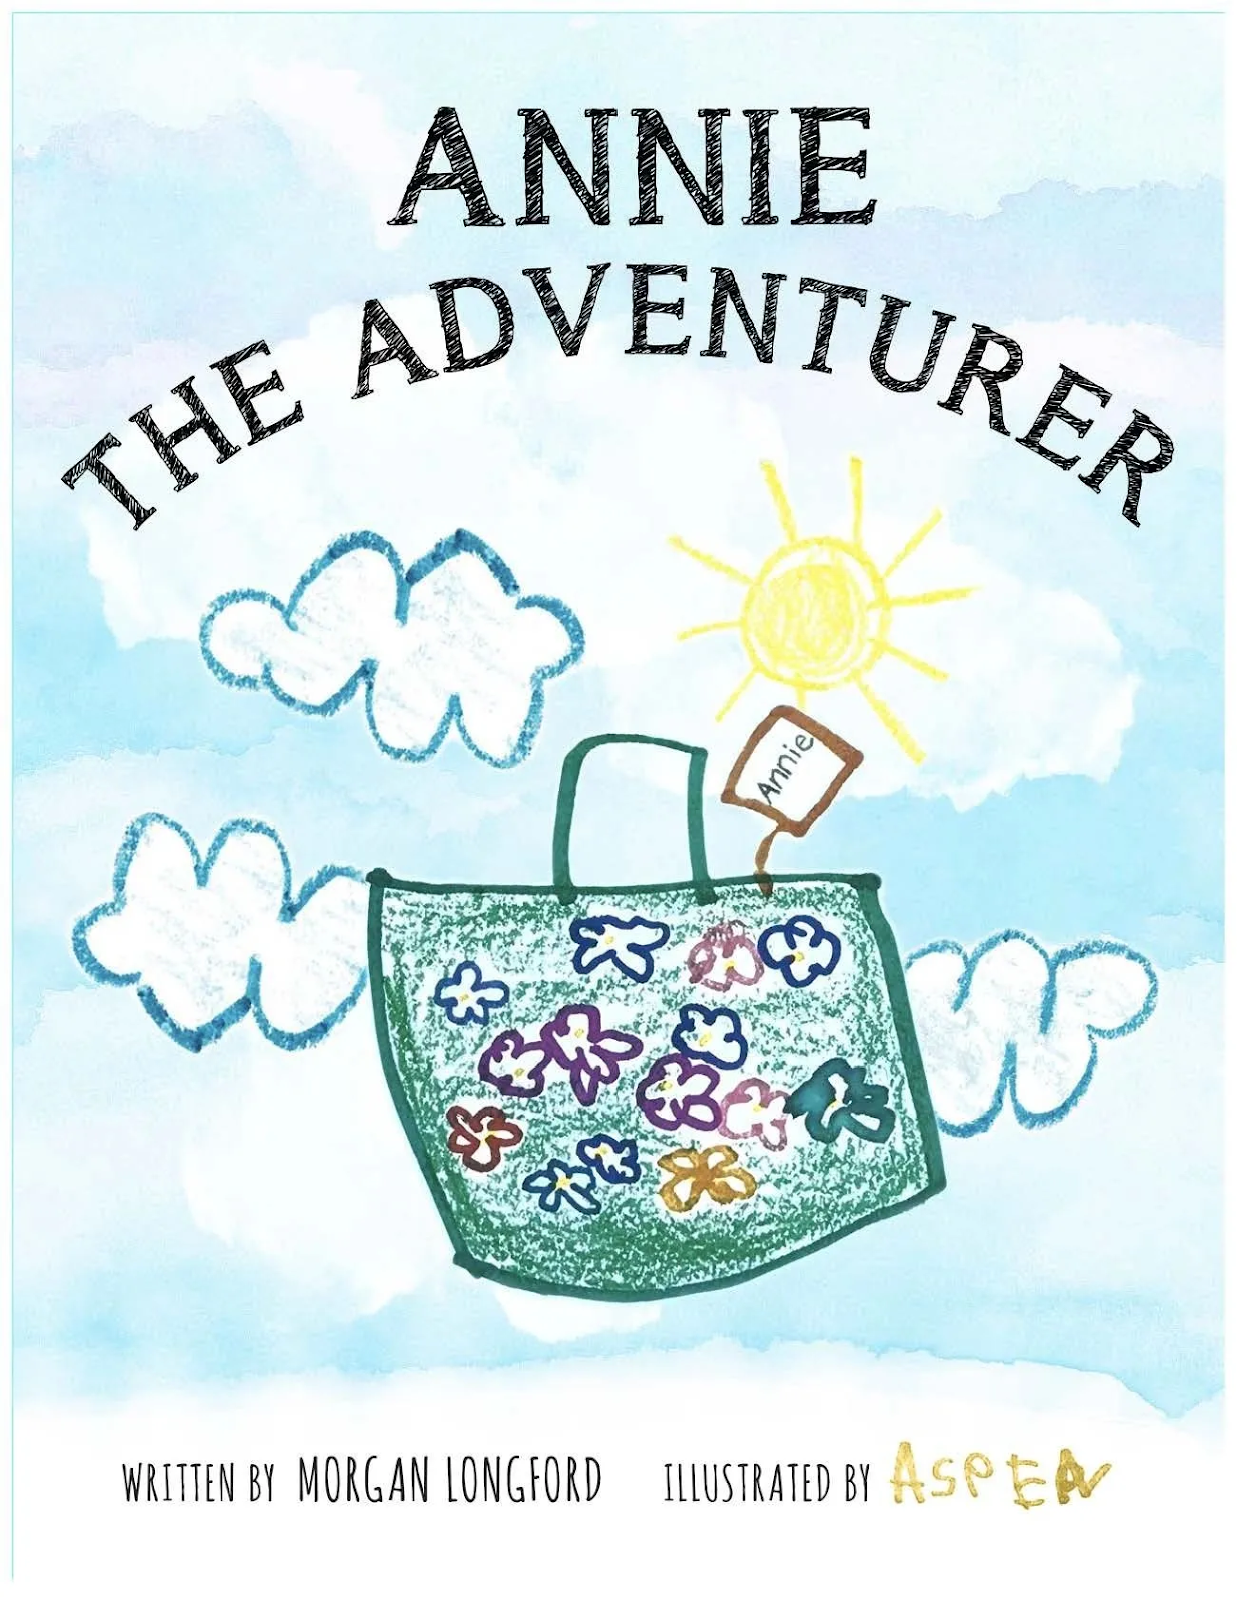 The cover image of Morgan’s book, illustrated by Aspen.